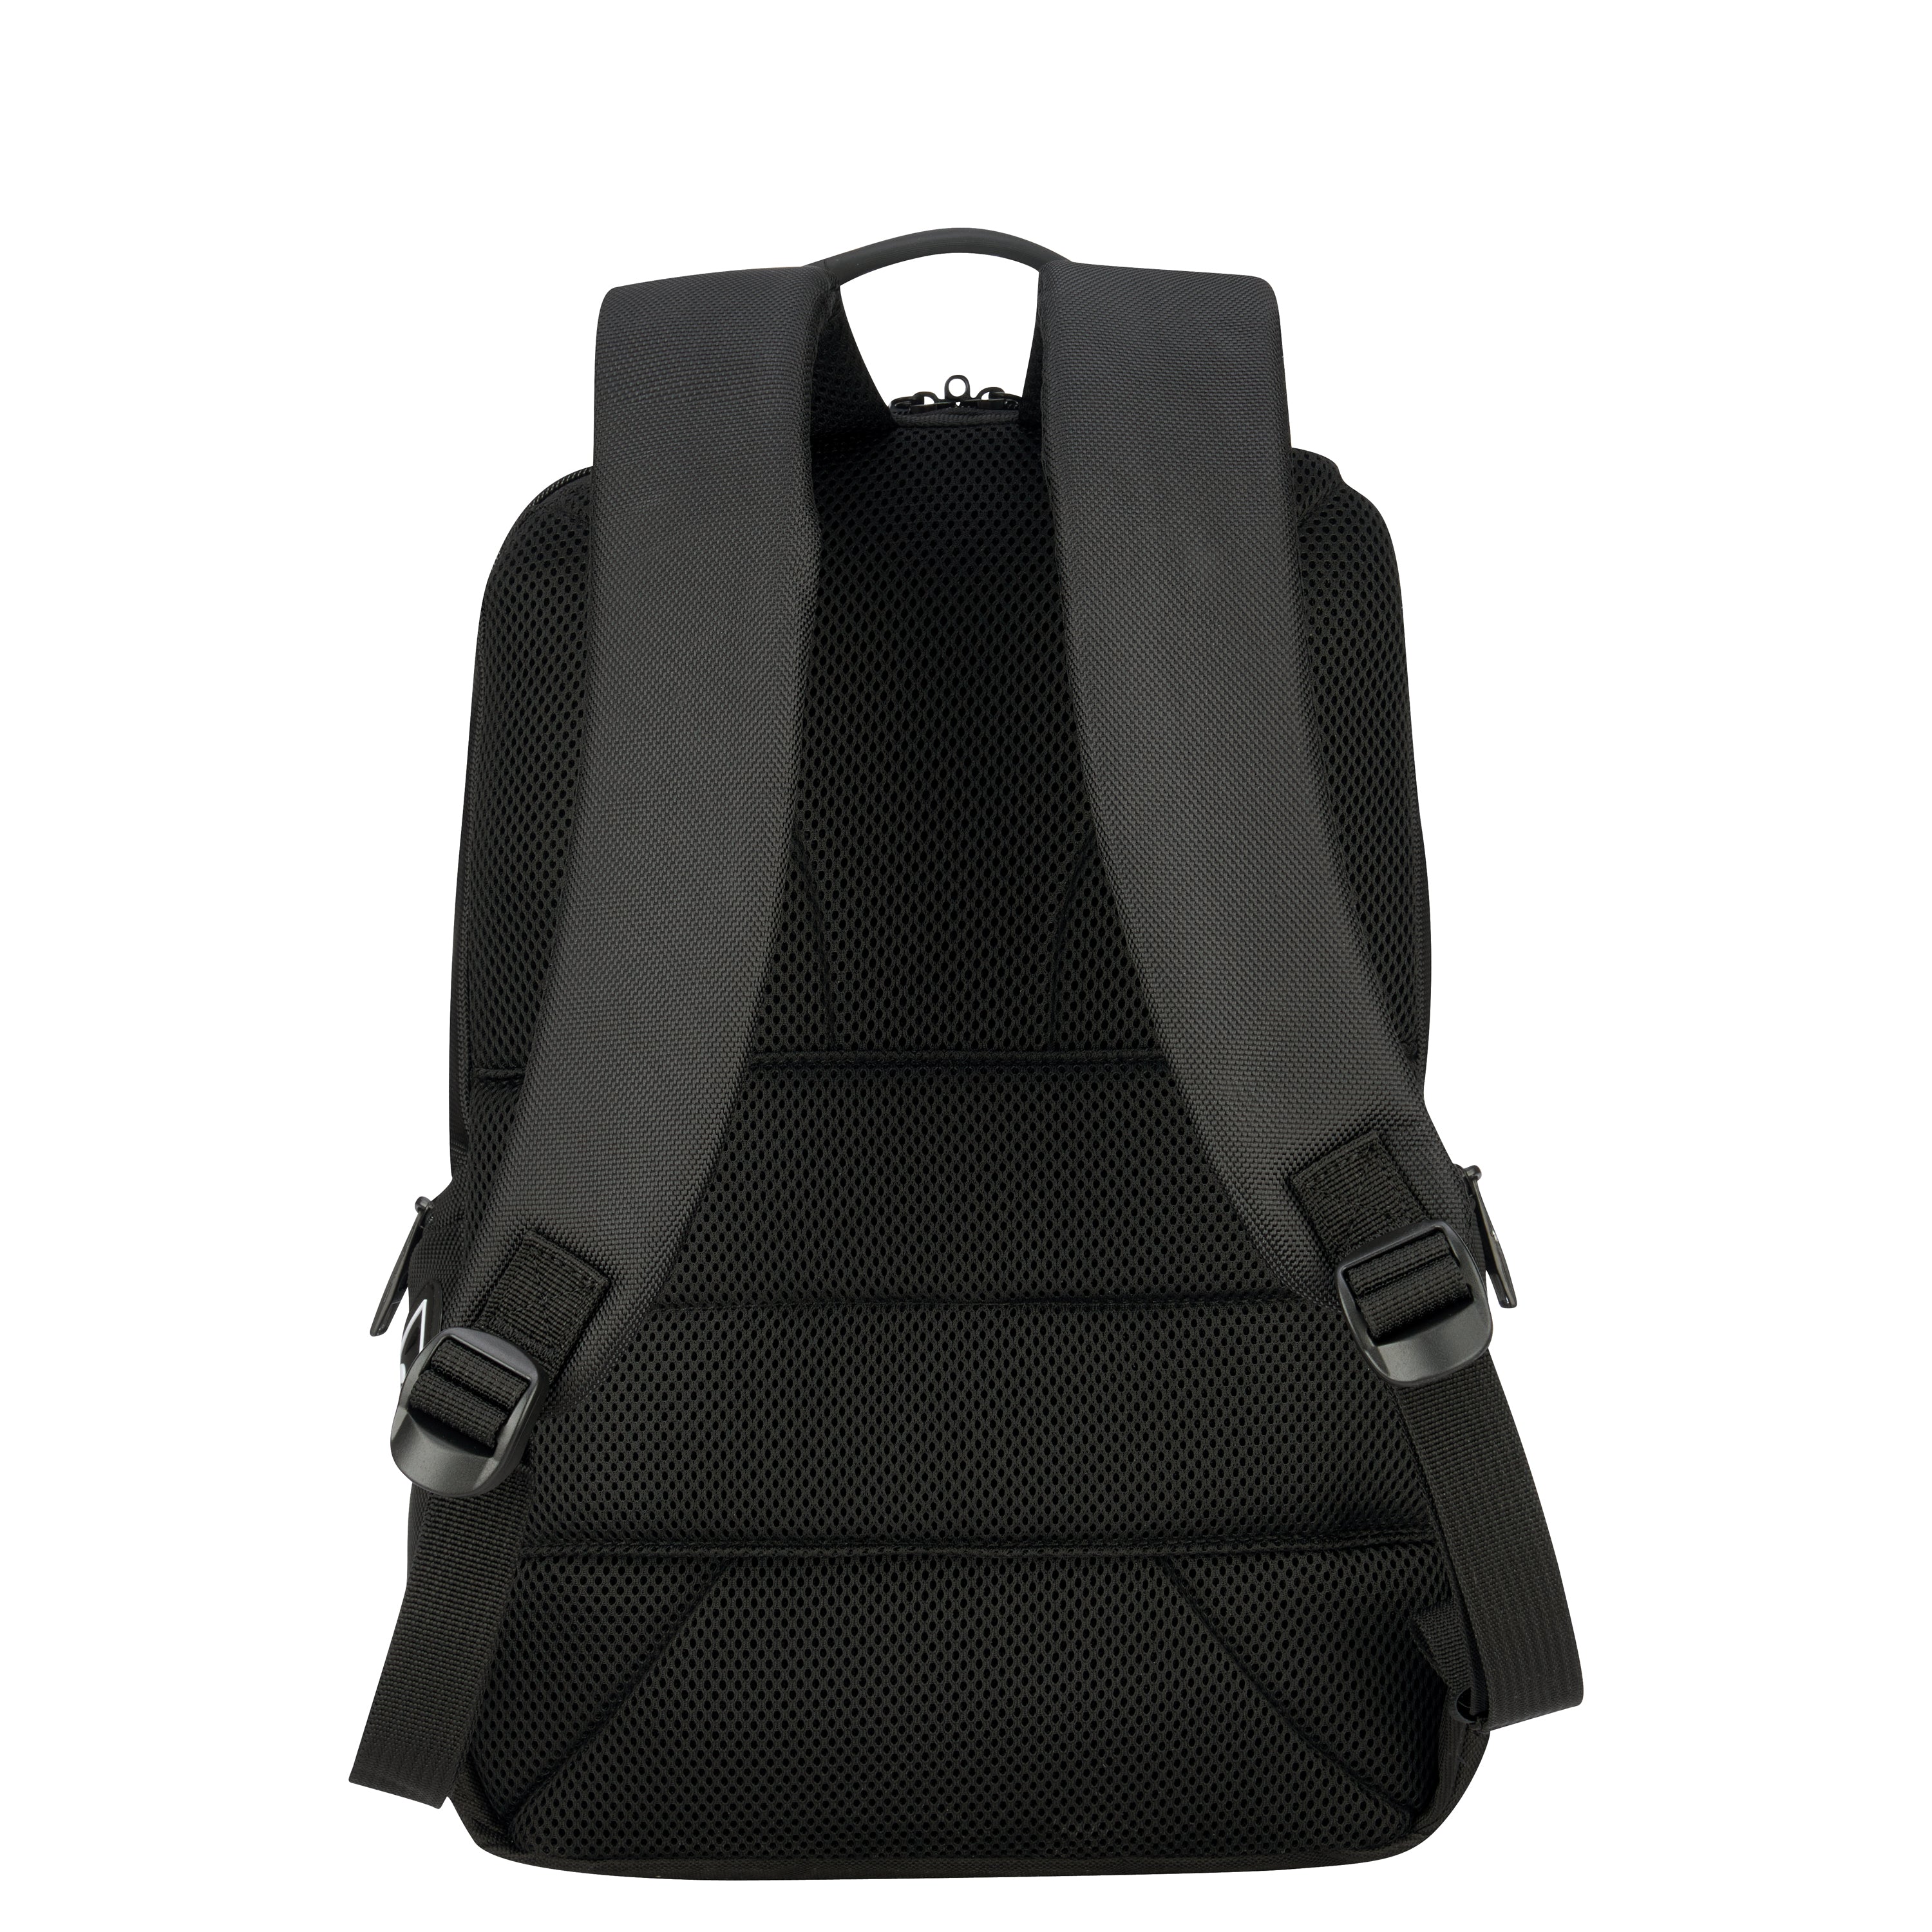 Delsey Parvis+ 2 Compartment Backpack Laptop 13.3 Inch Black - 394460200